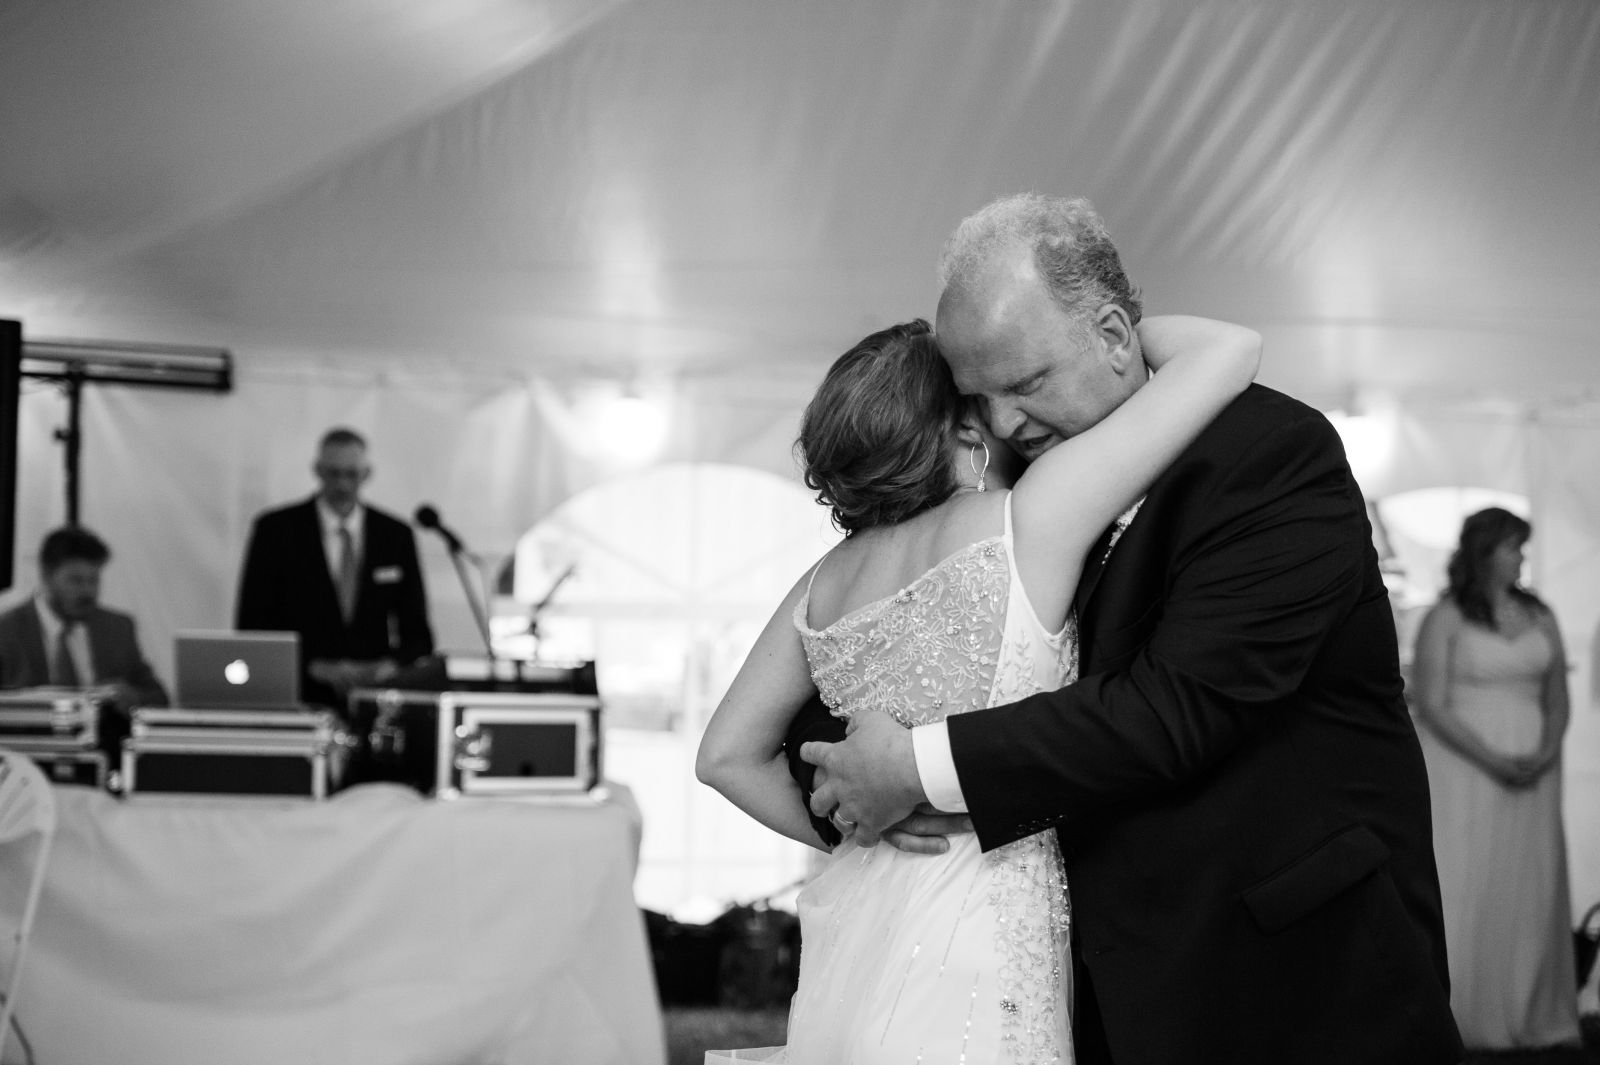 Father-Daughter Dance with Pluister Entertainment at a private "tent panel" with www.juliaauephotography.com